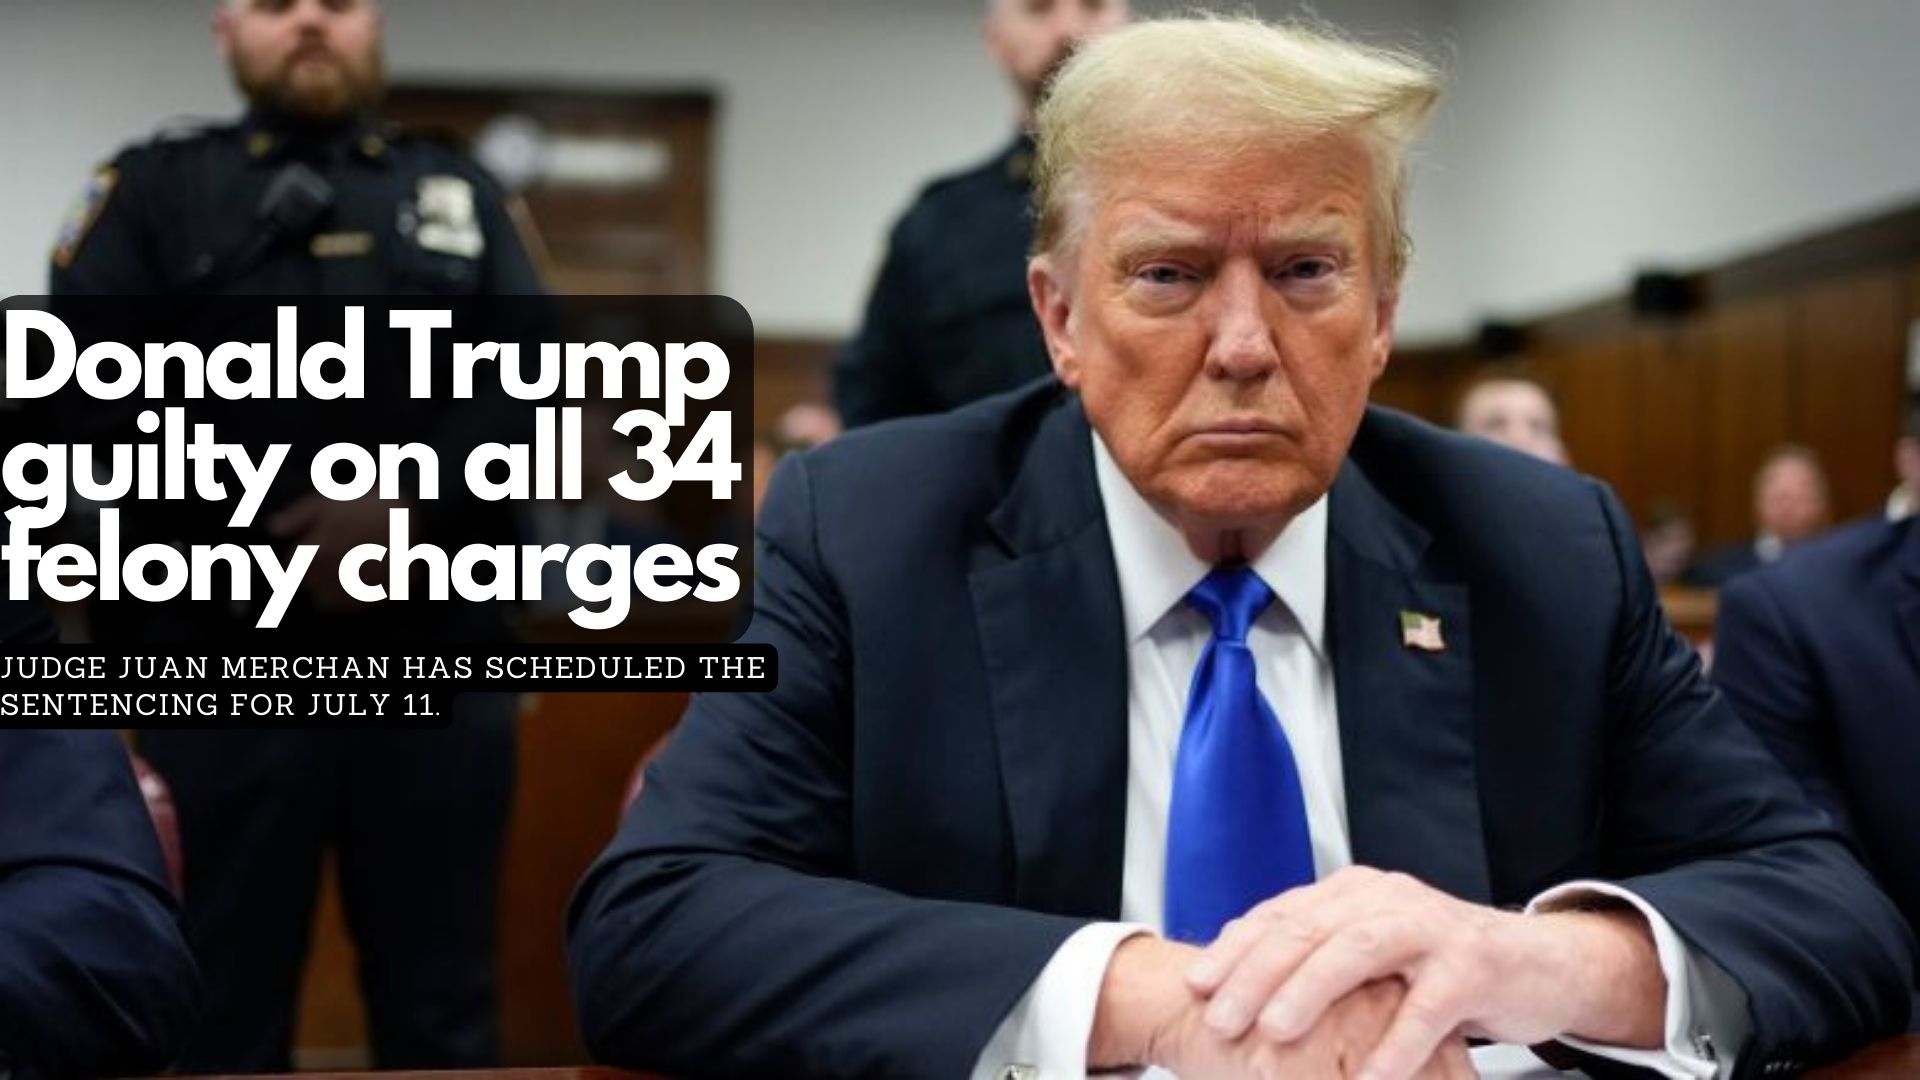 Donald Trump guilty on all 34 felony charges